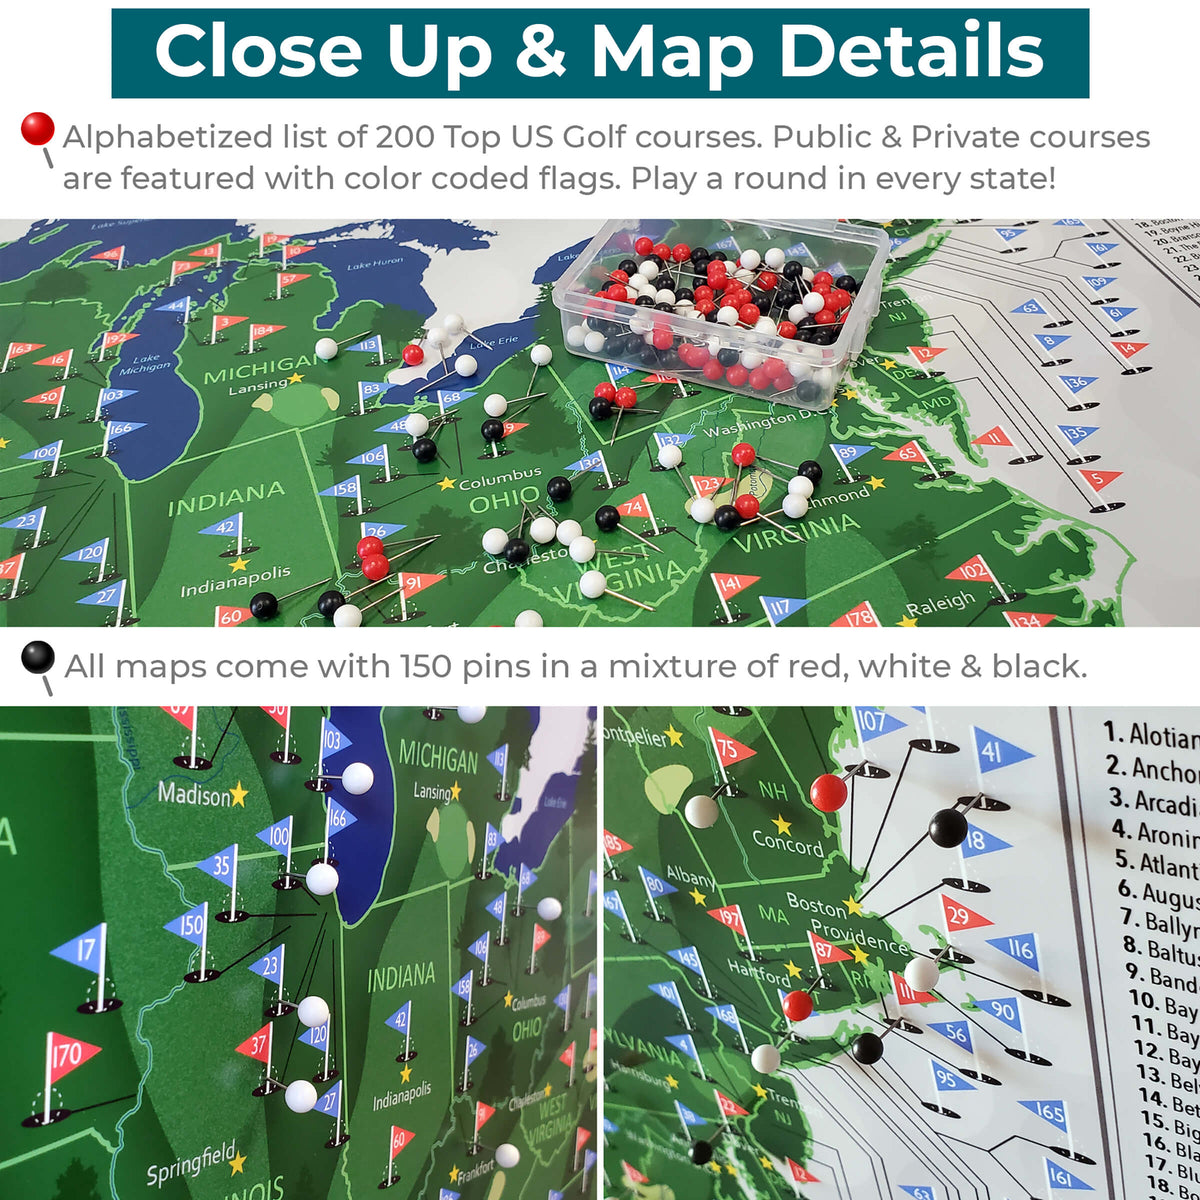 Top 200 Golf Courses USA Push Pin Travel Maps - Close up and Details